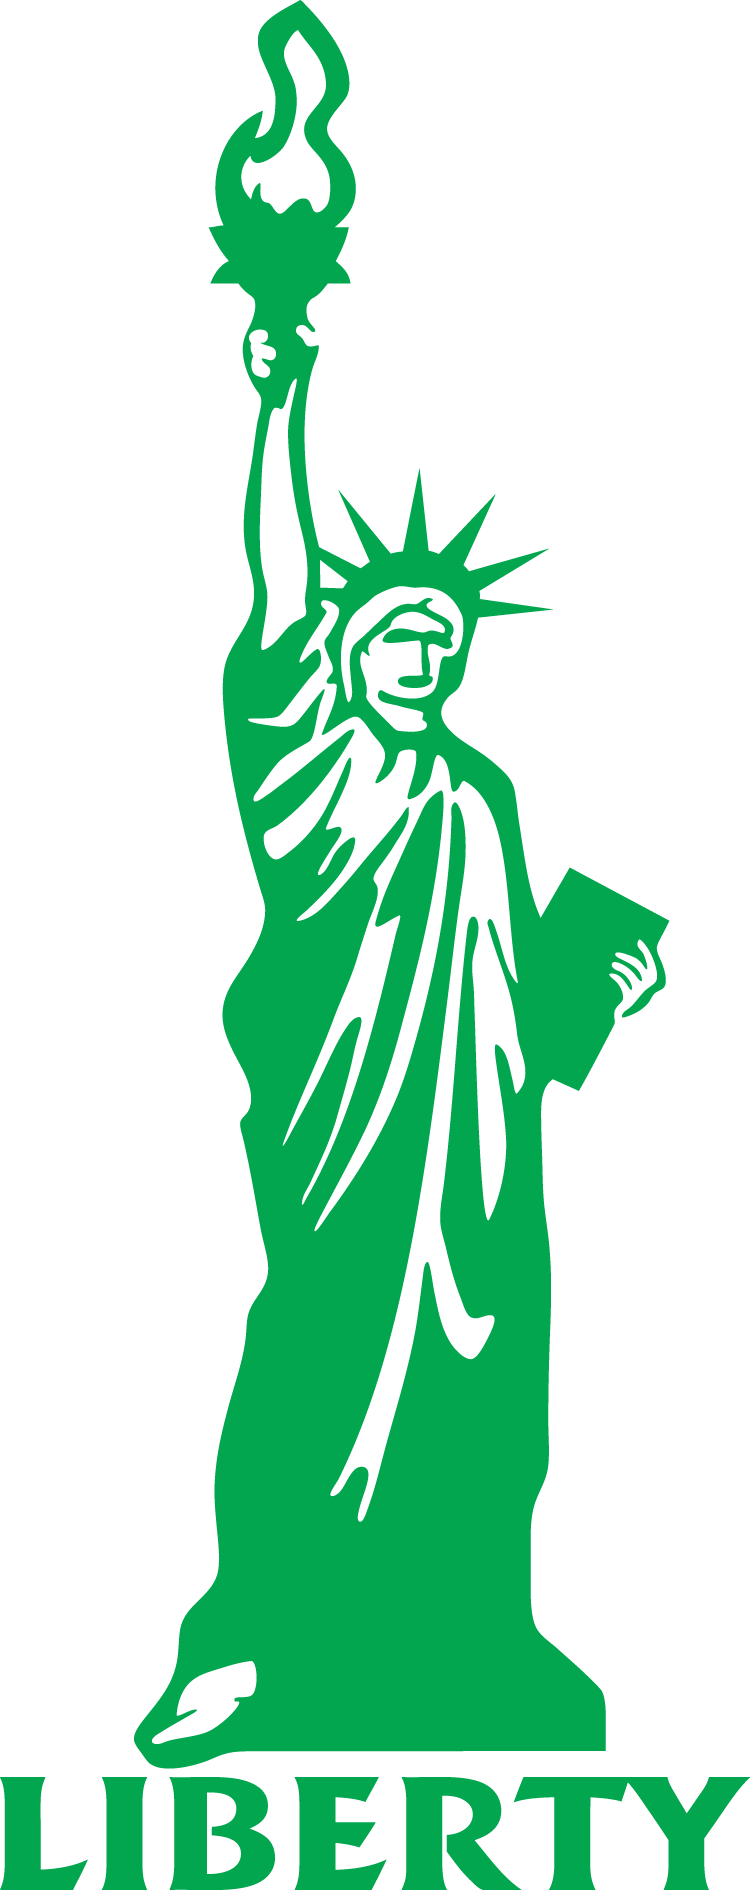 A Statue Of Liberty With A Green Crown